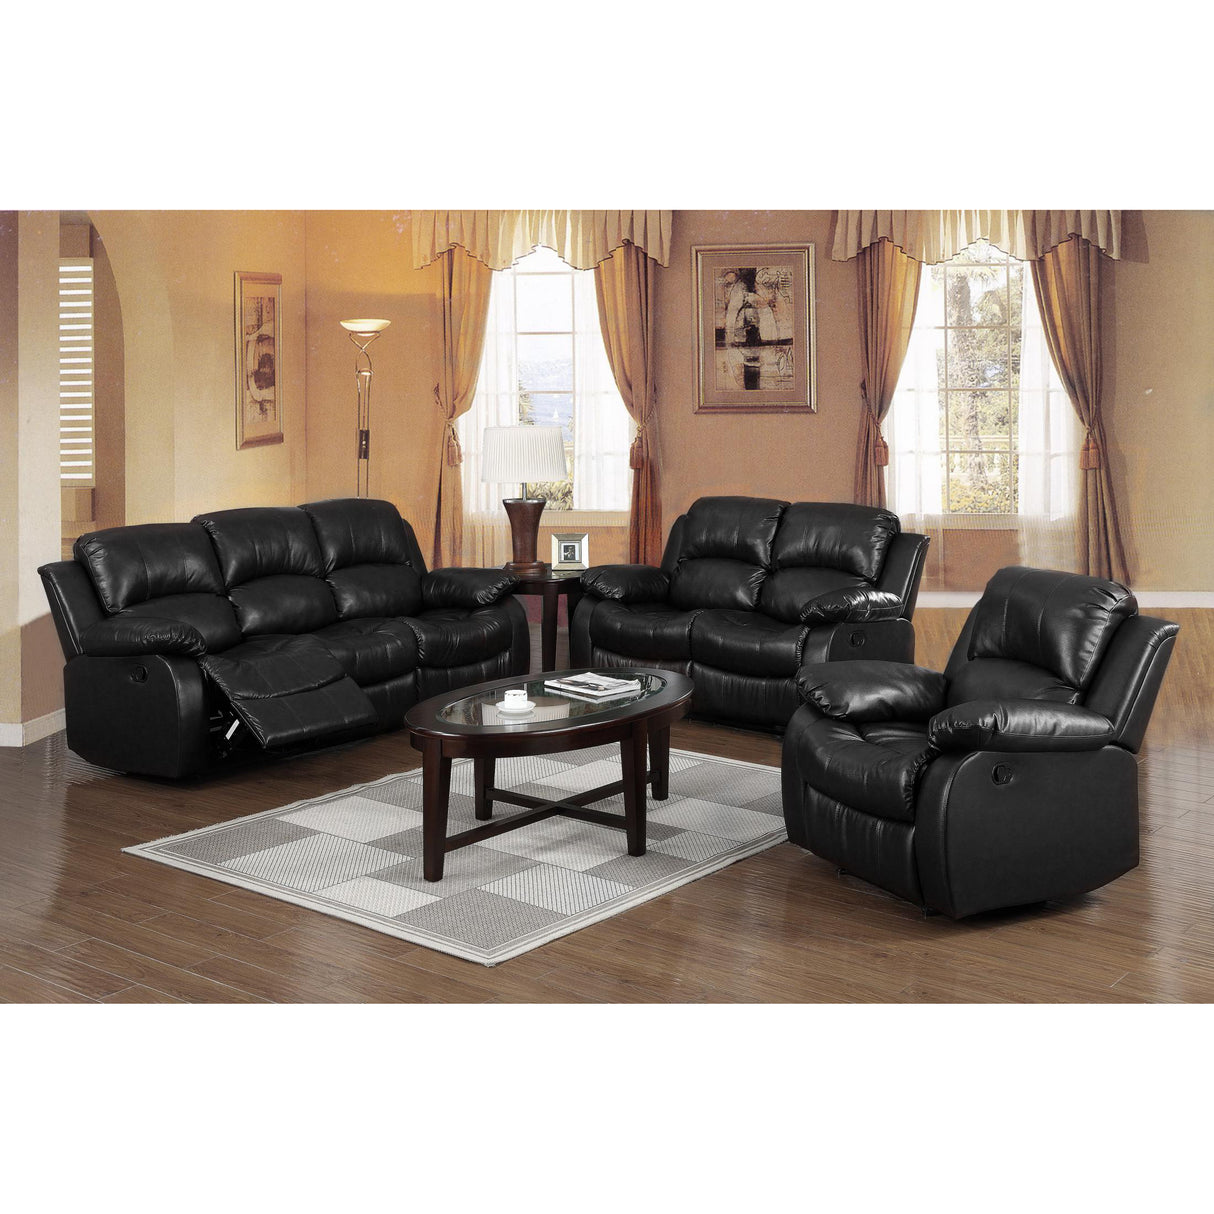 Carlino Recliner Full Bonded Leather 3 Seater Black